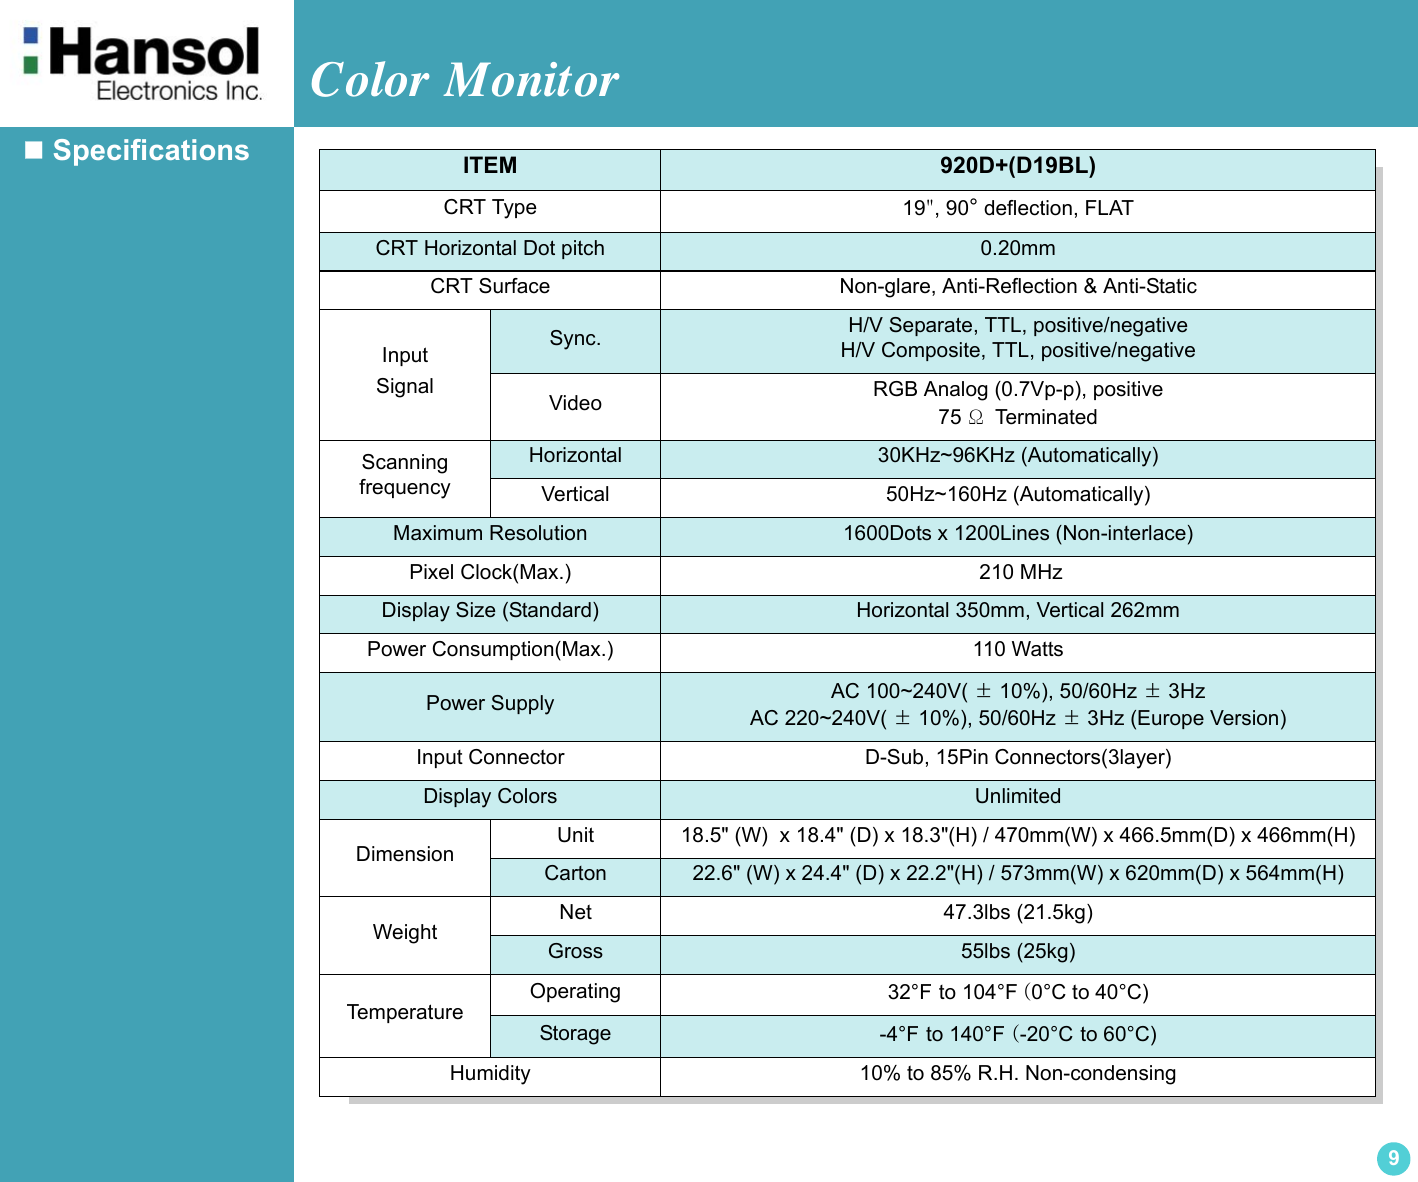 Color Monitor9 Specifications    ITEM 920D+(D19BL)CRT Type 19&quot;, 90° deflection, FLATCRT Horizontal Dot pitch 0.20mmCRT Surface Non-glare, Anti-Reflection &amp; Anti-StaticInputSignalSync. H/V Separate, TTL, positive/negativeH/V Composite, TTL, positive/negativeVideo RGB Analog (0.7Vp-p), positive75 Ω  TerminatedScanningfrequencyHorizontal 30KHz~96KHz (Automatically)Vertical 50Hz~160Hz (Automatically)Maximum Resolution 1600Dots x 1200Lines (Non-interlace)Pixel Clock(Max.)   210 MHzDisplay Size (Standard)  Horizontal 350mm, Vertical 262mmPower Consumption(Max.) 110 WattsPower Supply AC 100~240V( ±10%), 50/60Hz ±3HzAC 220~240V( ±10%), 50/60Hz ±3Hz (Europe Version) Input Connector  D-Sub, 15Pin Connectors(3layer)Display Colors  UnlimitedDimension Unit 18.5&quot; (W)  x 18.4&quot; (D) x 18.3&quot;(H) / 470mm(W) x 466.5mm(D) x 466mm(H)Carton 22.6&quot; (W) x 24.4&quot; (D) x 22.2&quot;(H) / 573mm(W) x 620mm(D) x 564mm(H)Weight Net 47.3lbs (21.5kg)Gross 55lbs (25kg)TemperatureOperating 32°F to 104°F (0°C to 40°C)Storage -4°F to 140°F (-20°C to 60°C)Humidity 10% to 85% R.H. Non-condensing